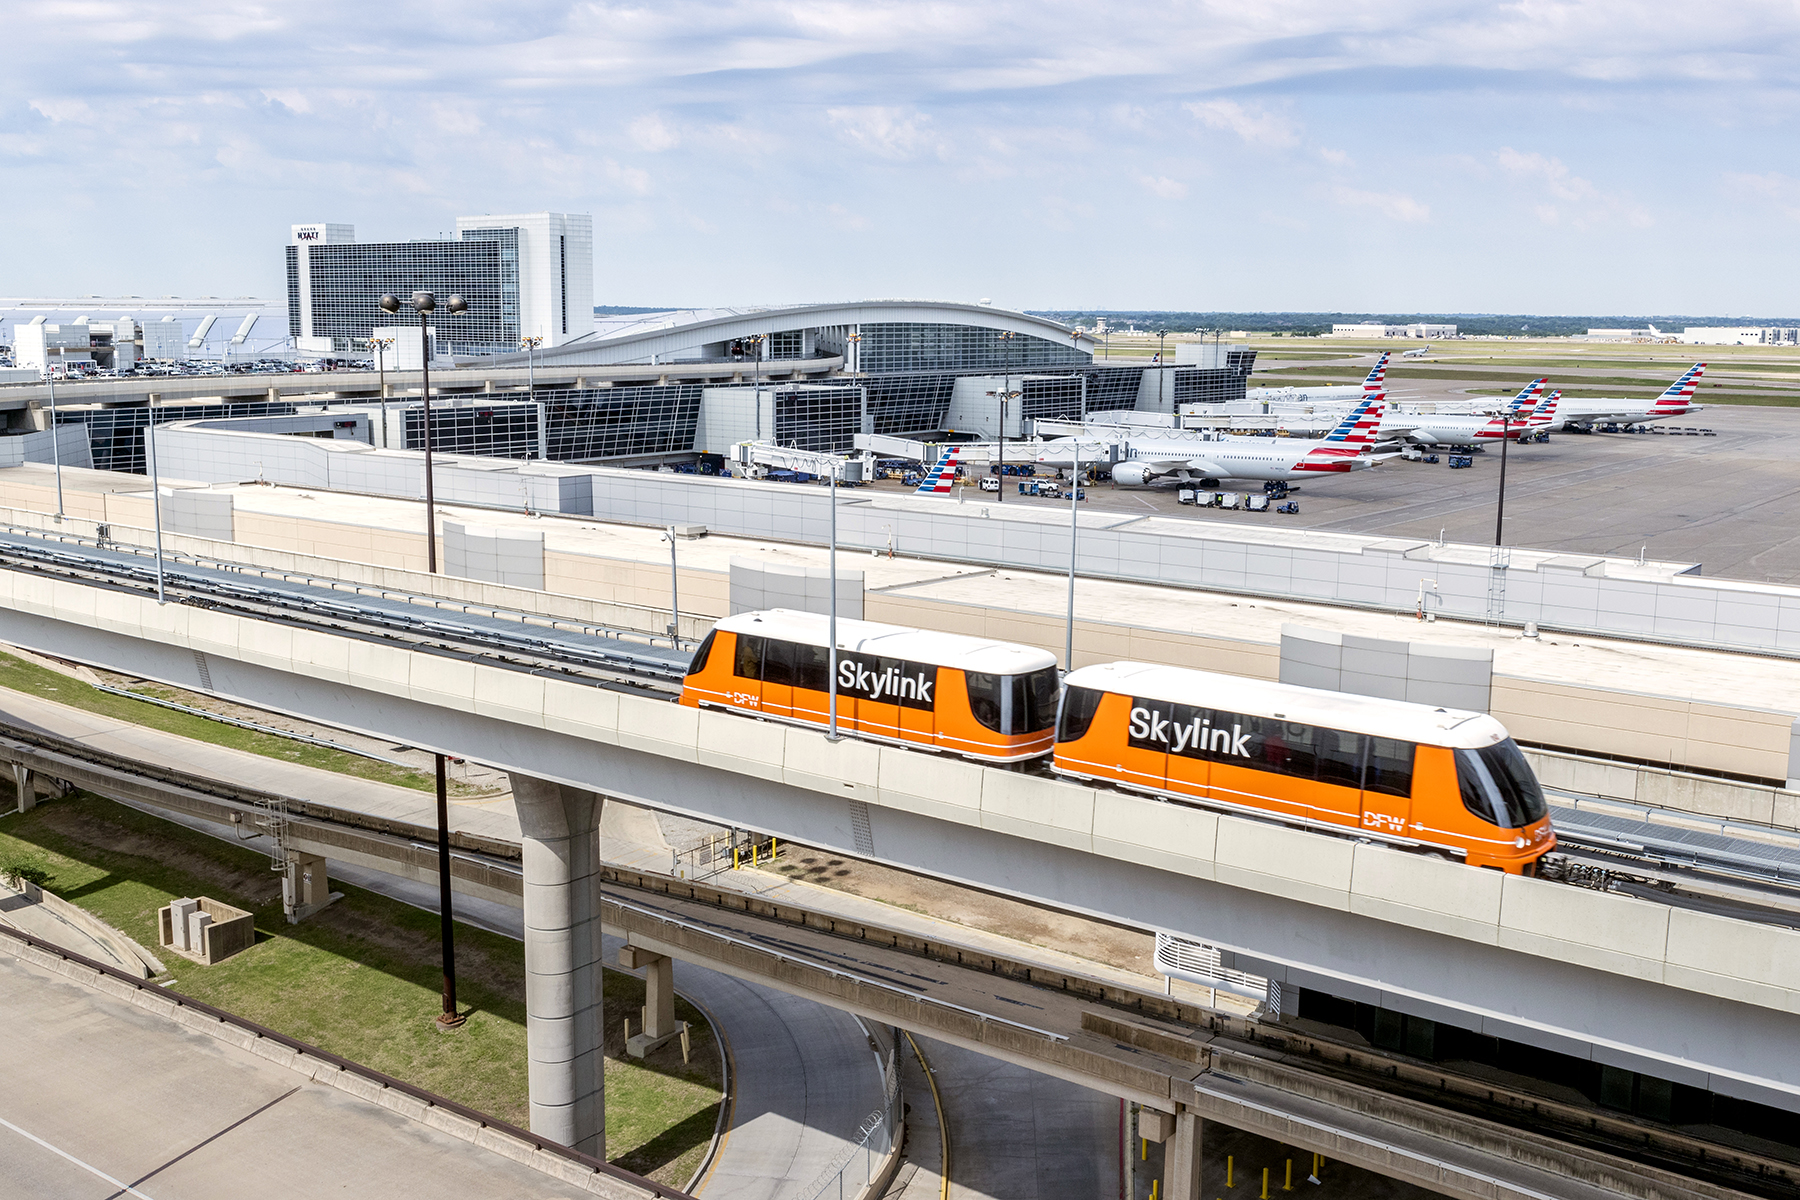 The Skylink APM system at Dallas Fort Worth International Airport